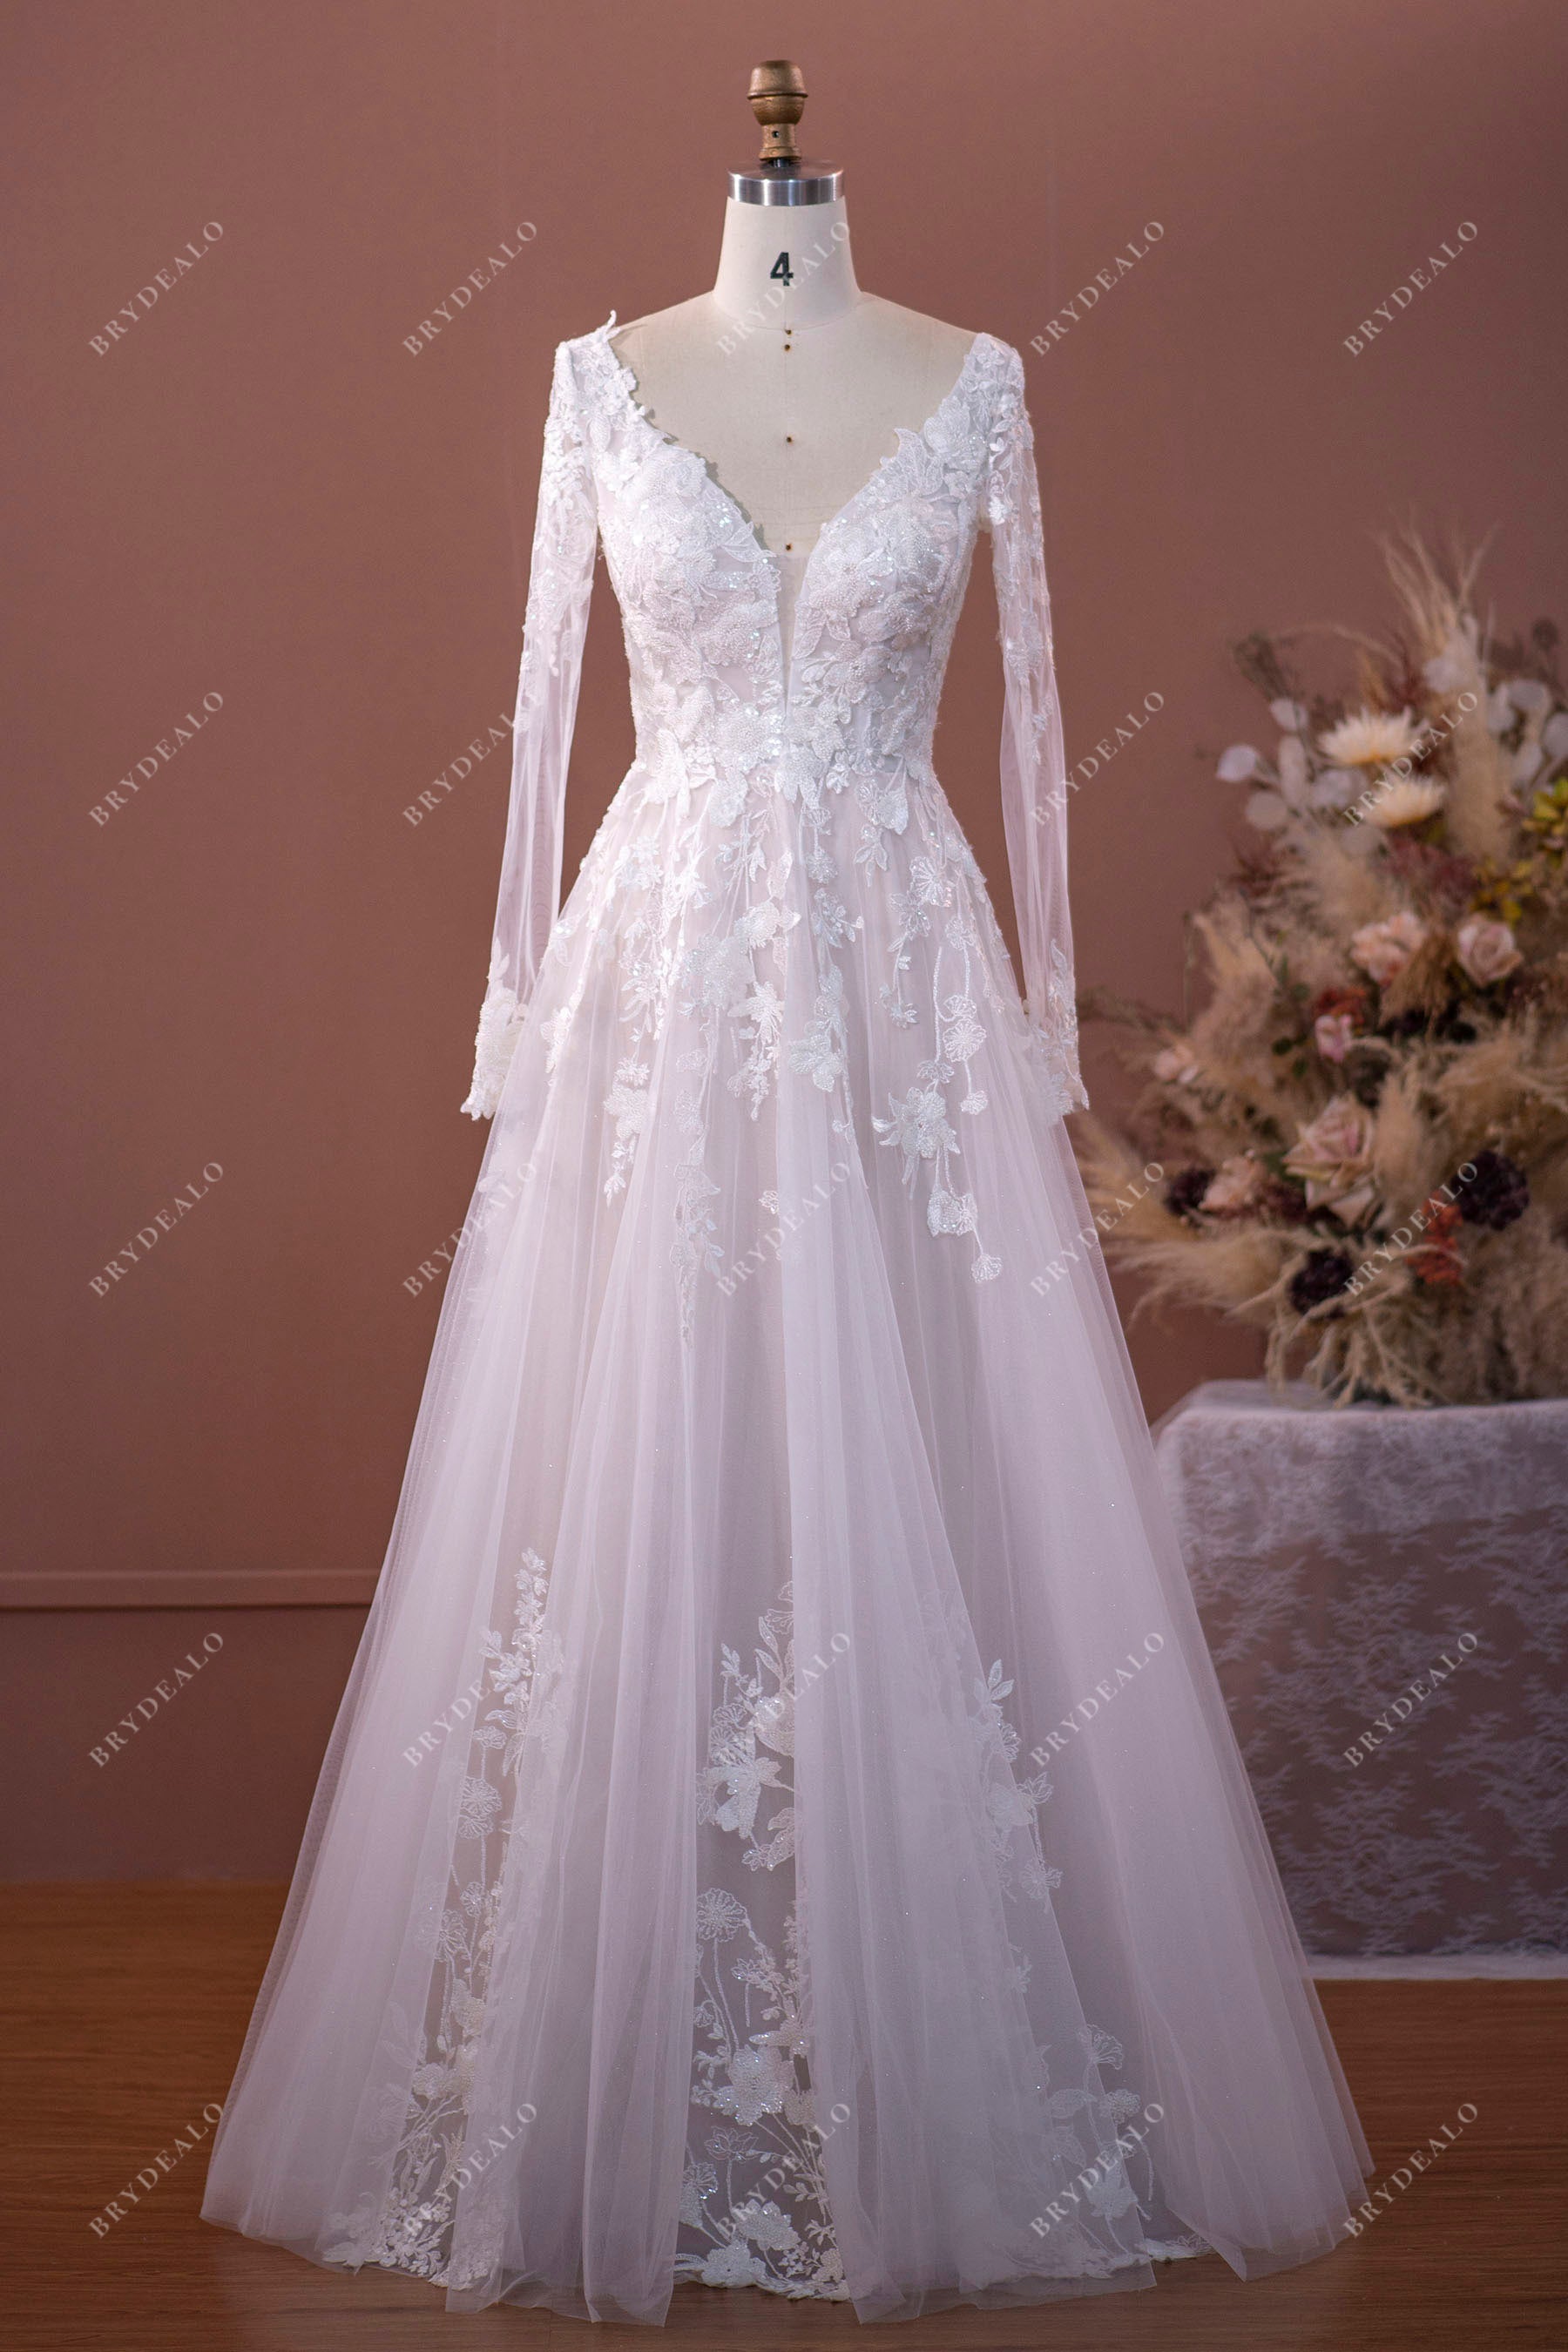 Sleeved Plunging Floor Length Bridal Gown